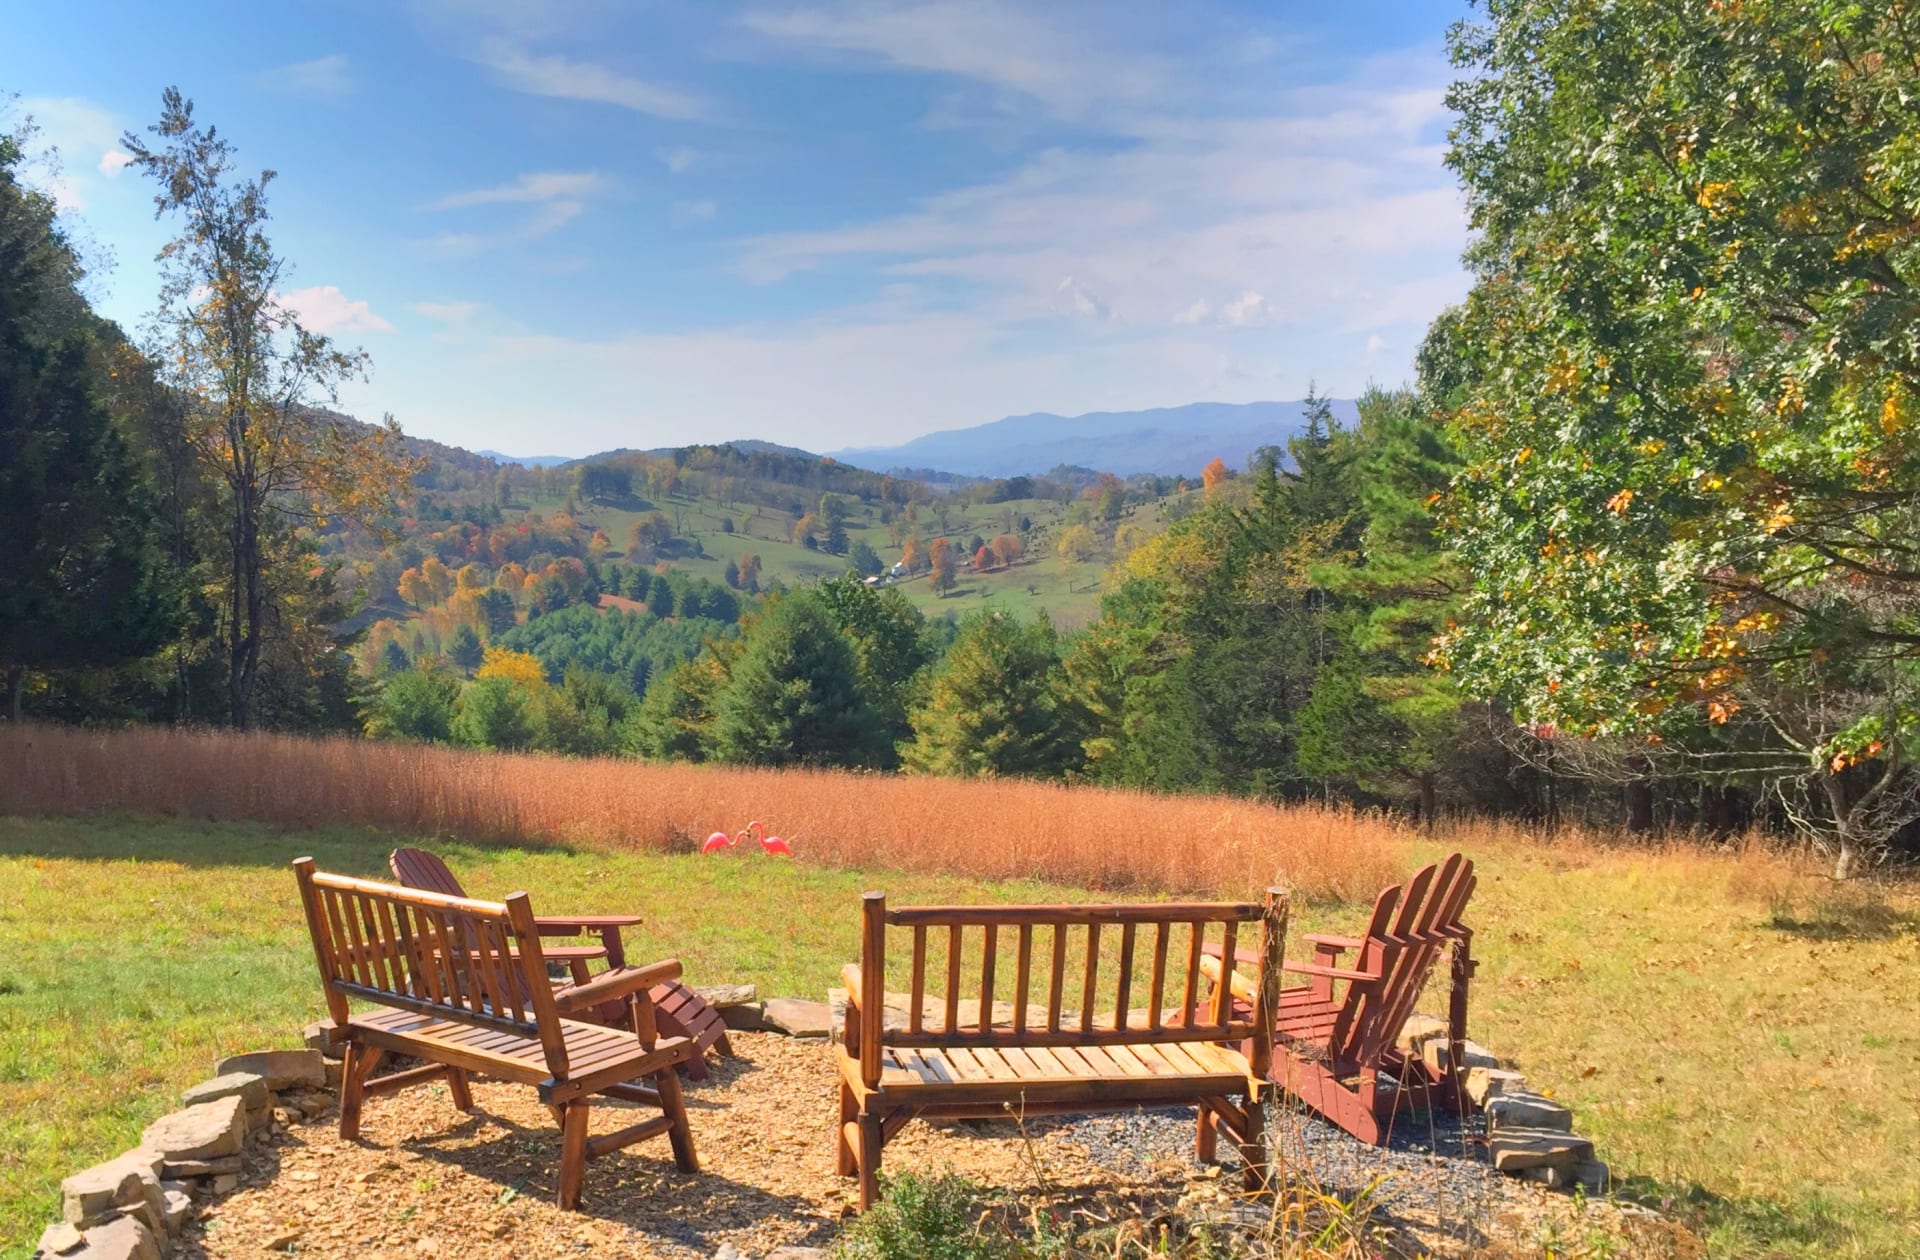 Take a hike on our miles of trails. A favorite destination is our top of the mountain patio with views all the way to VA!